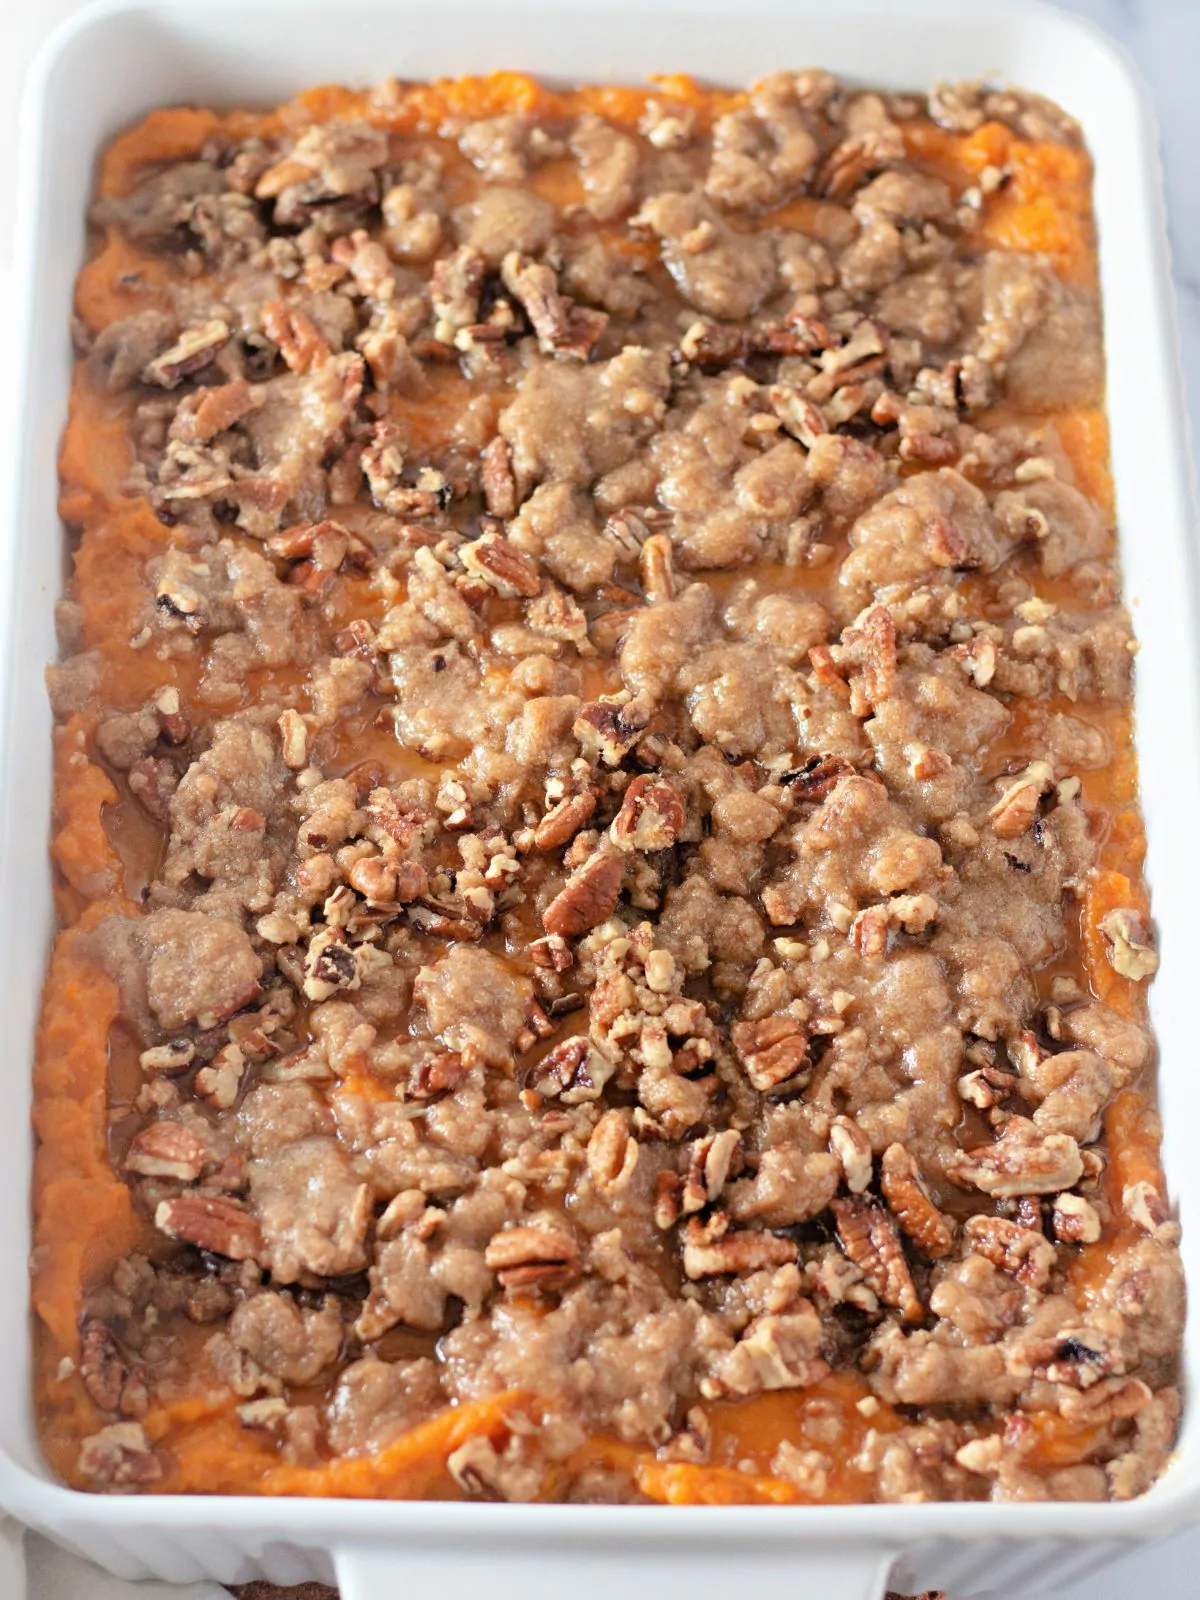 baked Thanksgiving casserole with sweet potatoes and brown sugar crumble.